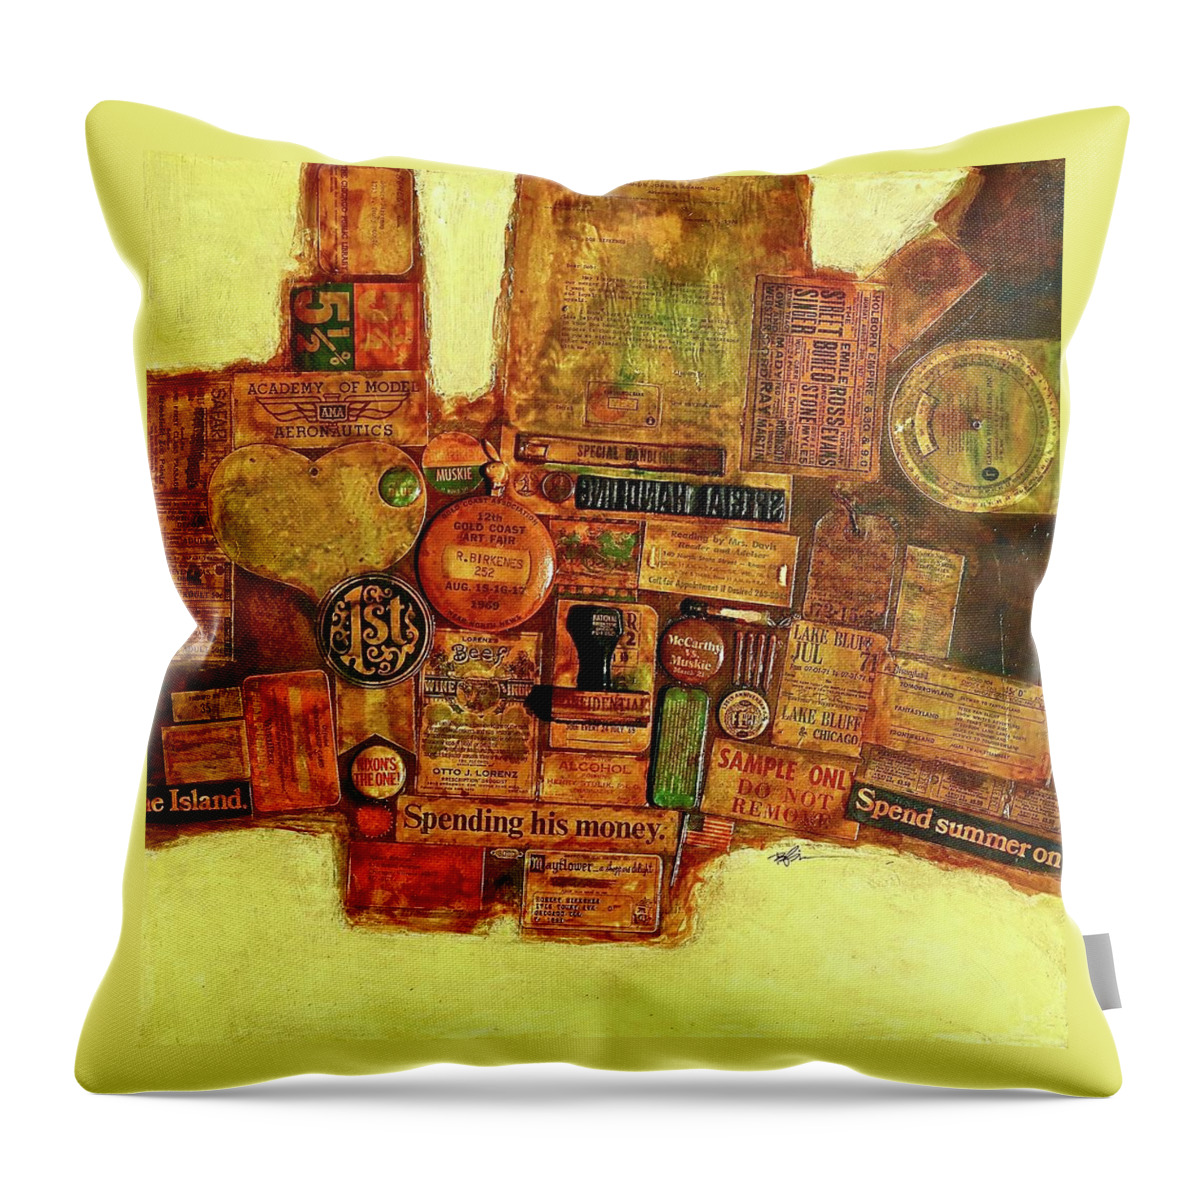 Assemblage Painting #6 - Mixed Media Assemblage Throw Pillow featuring the painting Assemblage Painting 6 by Robert Birkenes